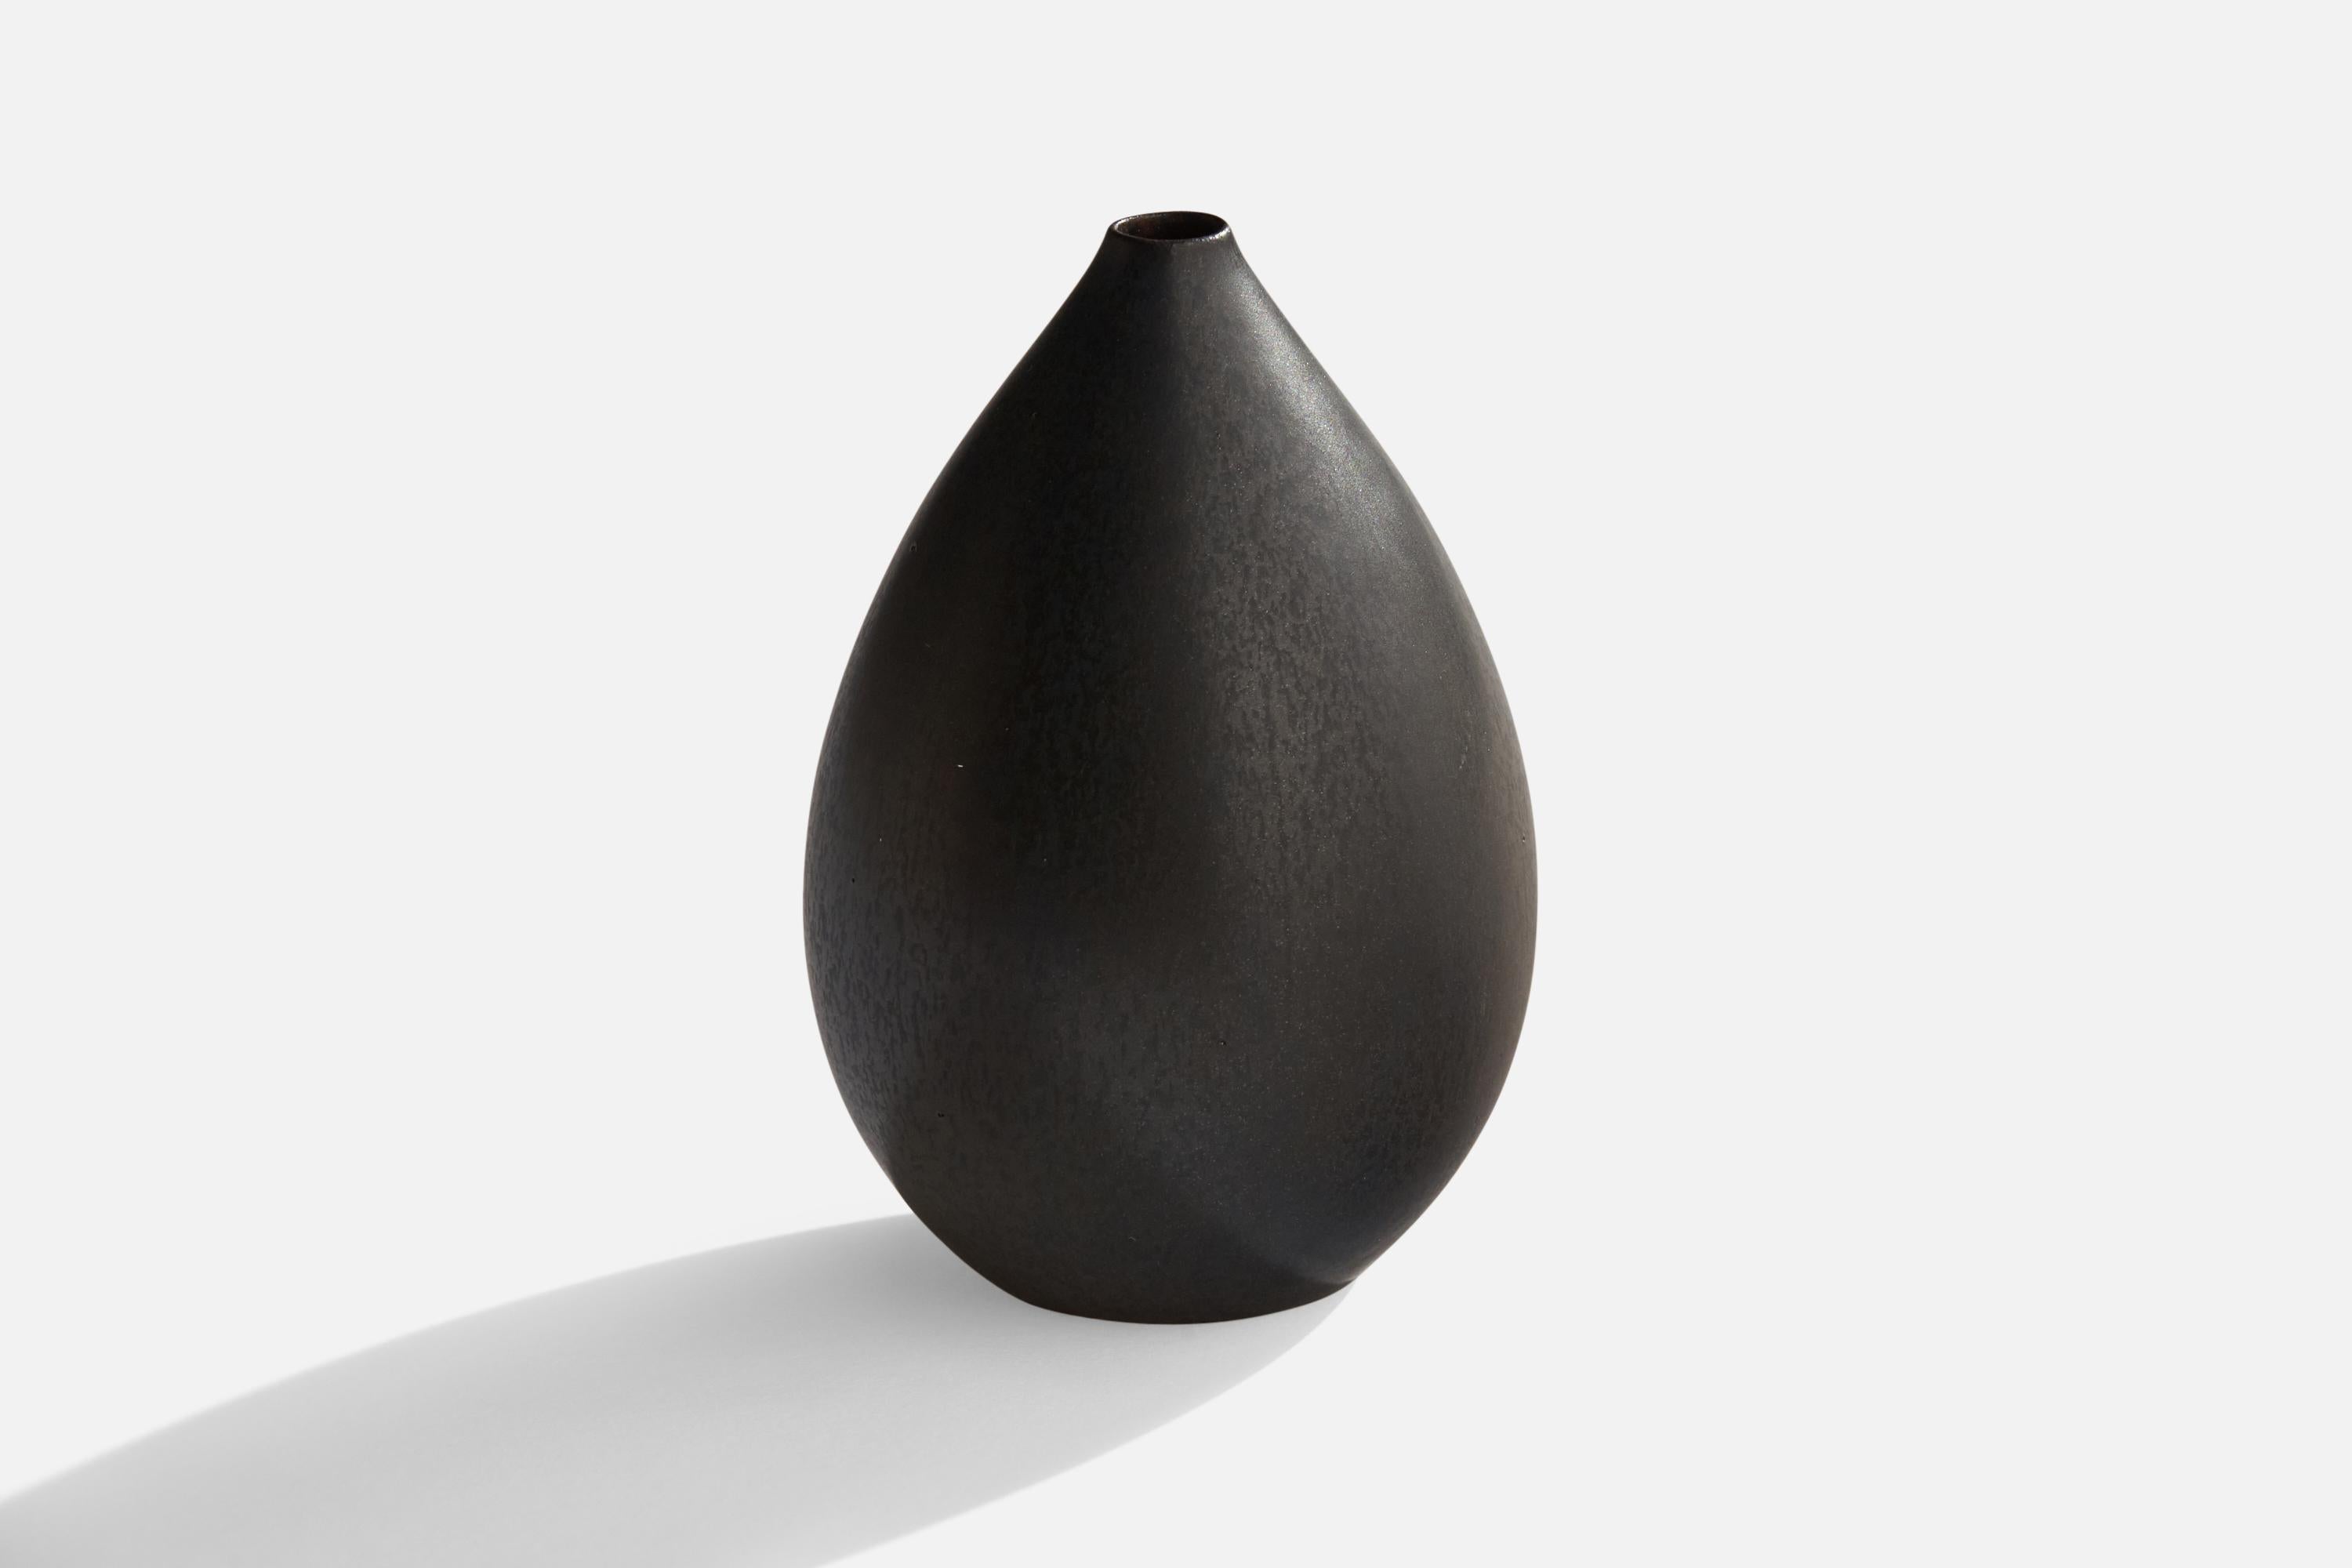 A black-glazed stoneware vase designed by Gunnar Nylund and produced by Rörstrand, Sweden, 1950s.